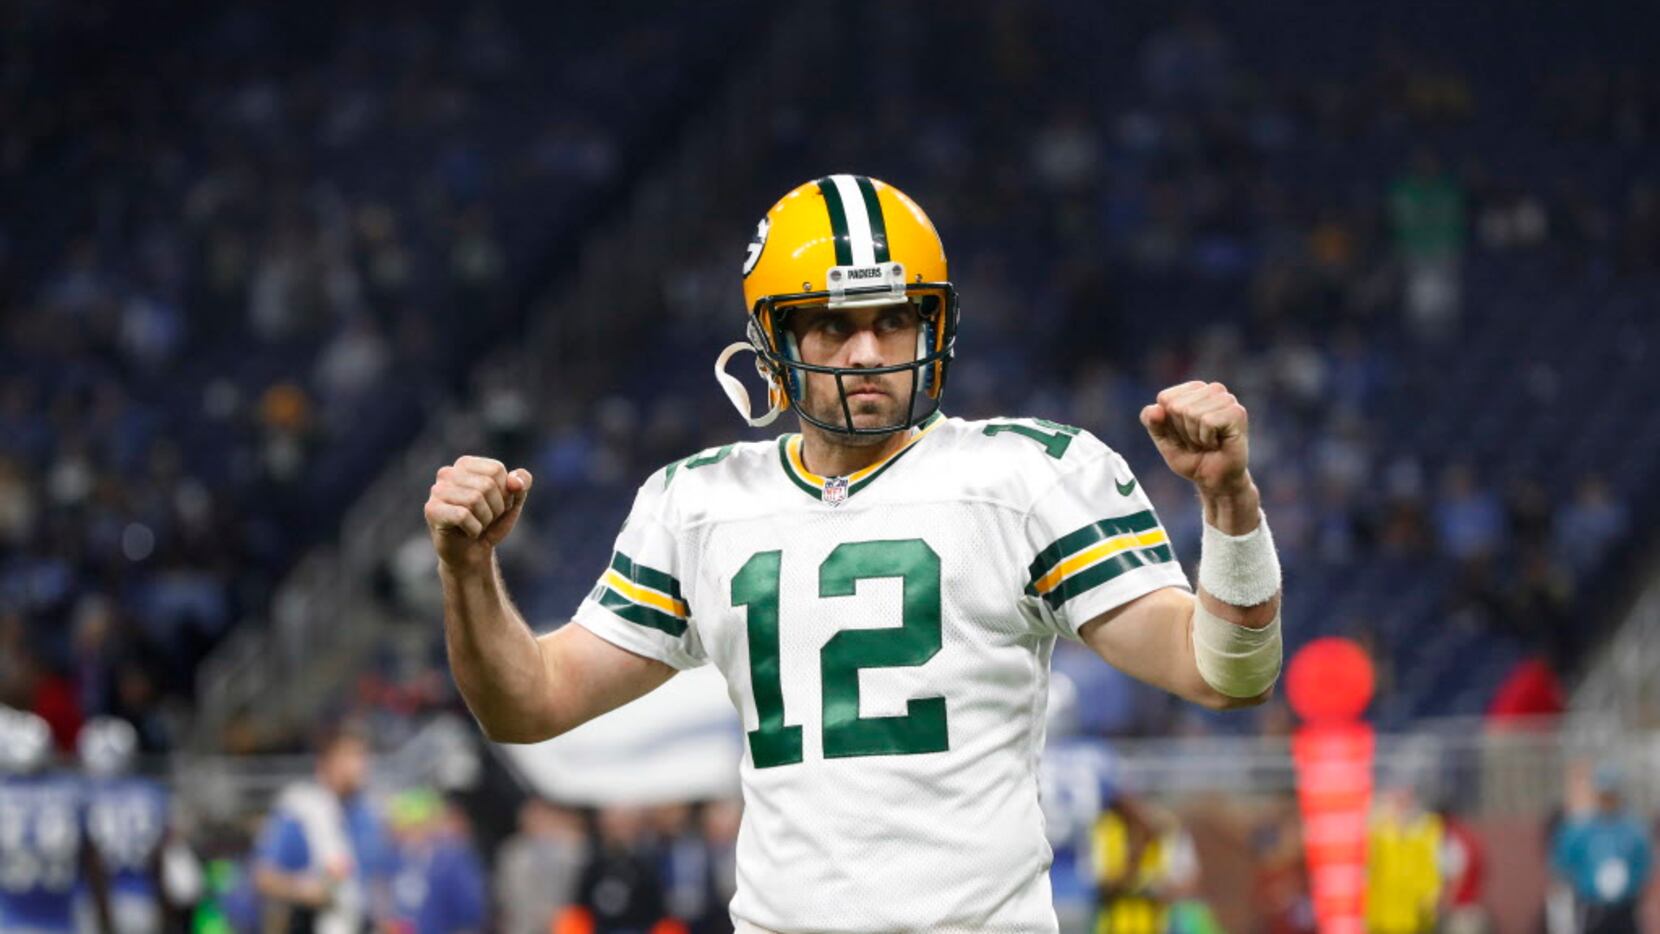 Aaron Rodgers is on a Tom Brady-like roll, but can he play even